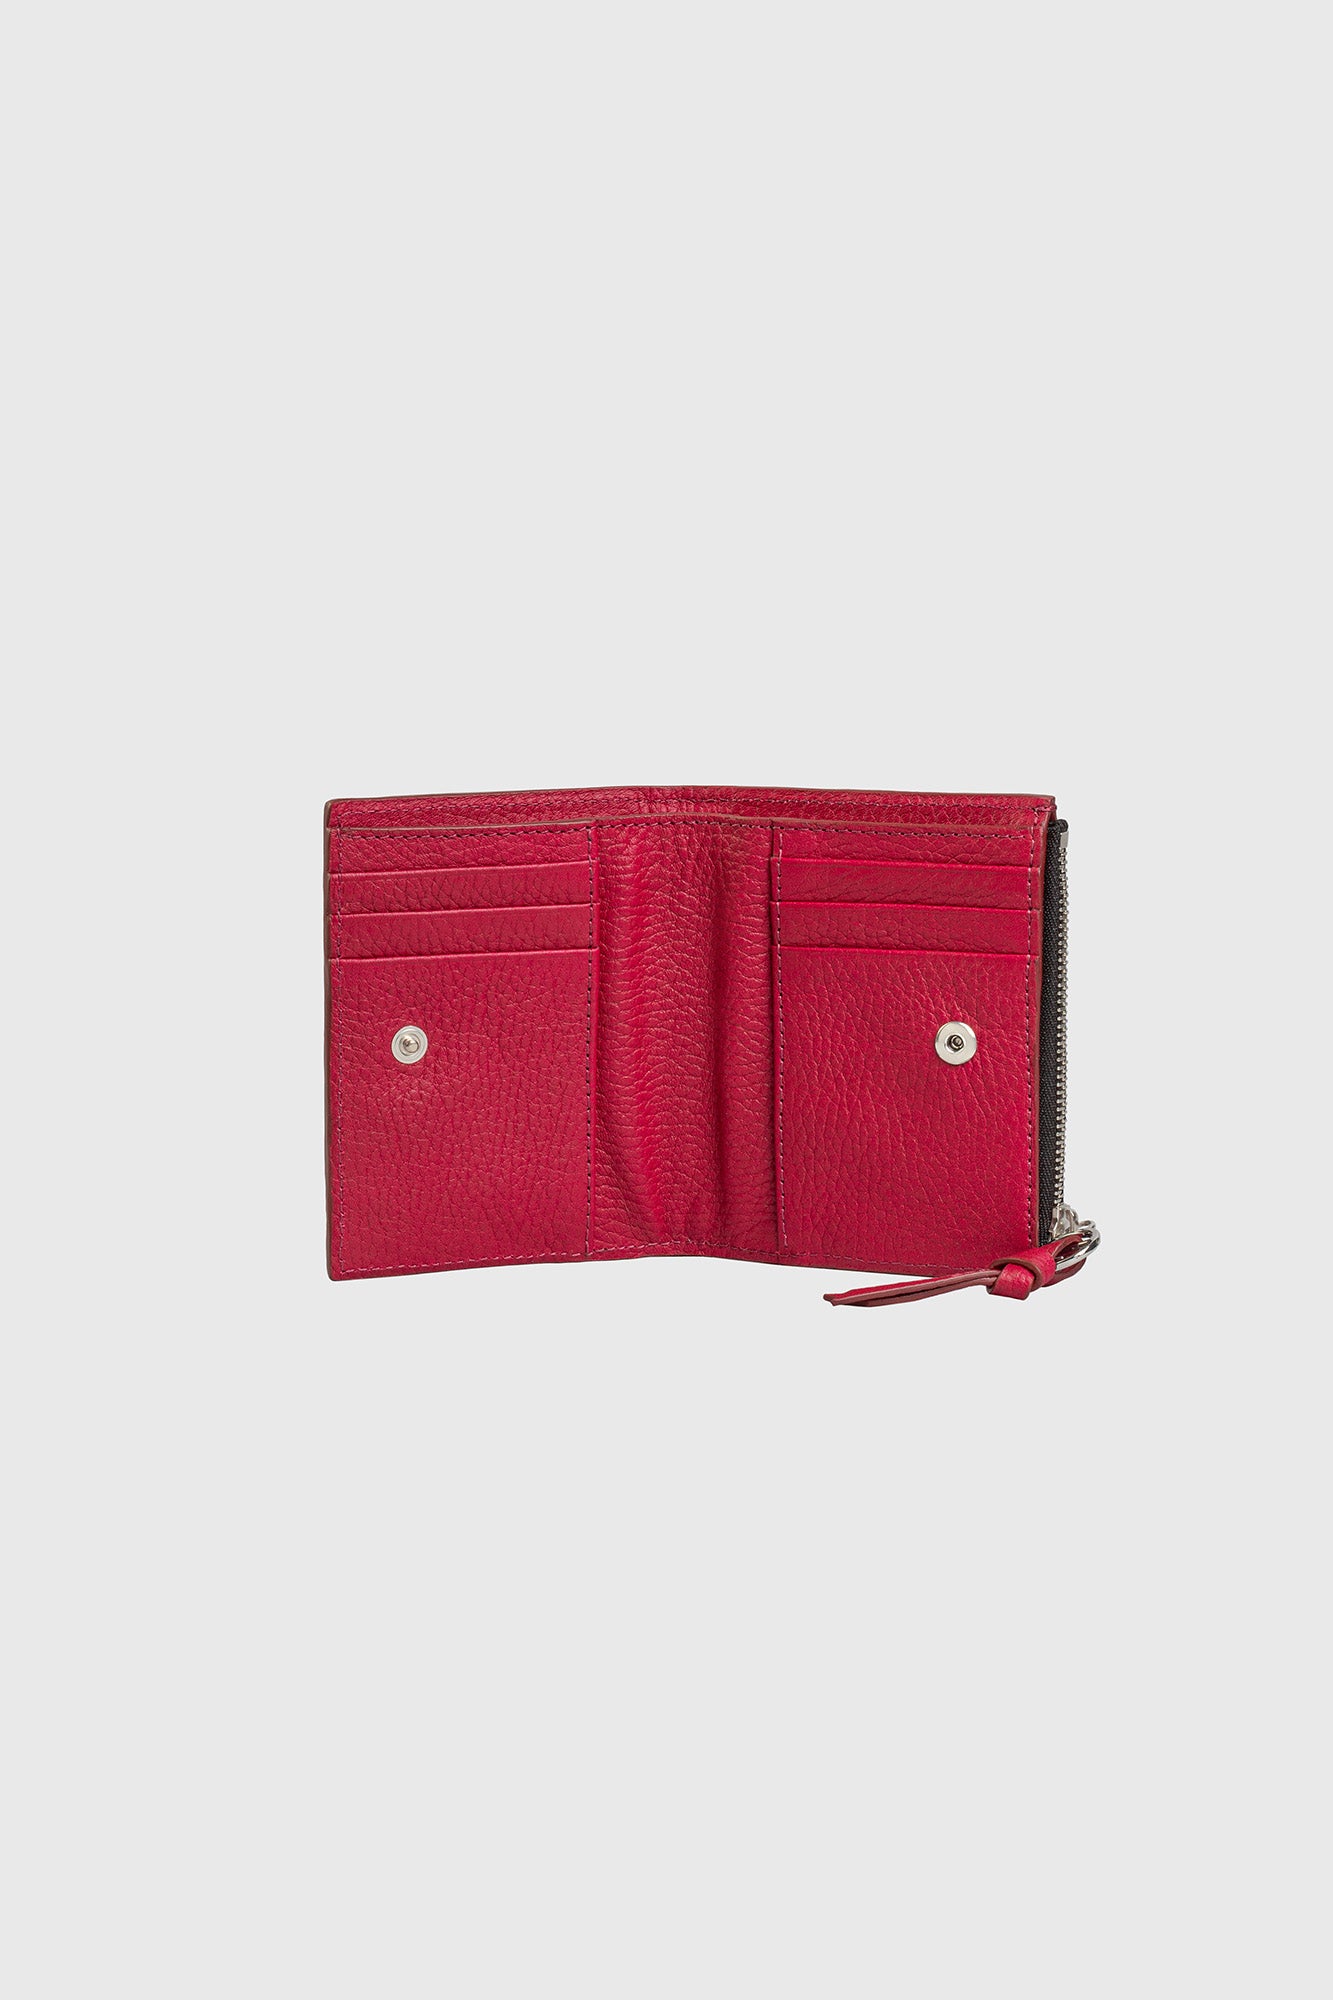 JL wallet leather - Berry red